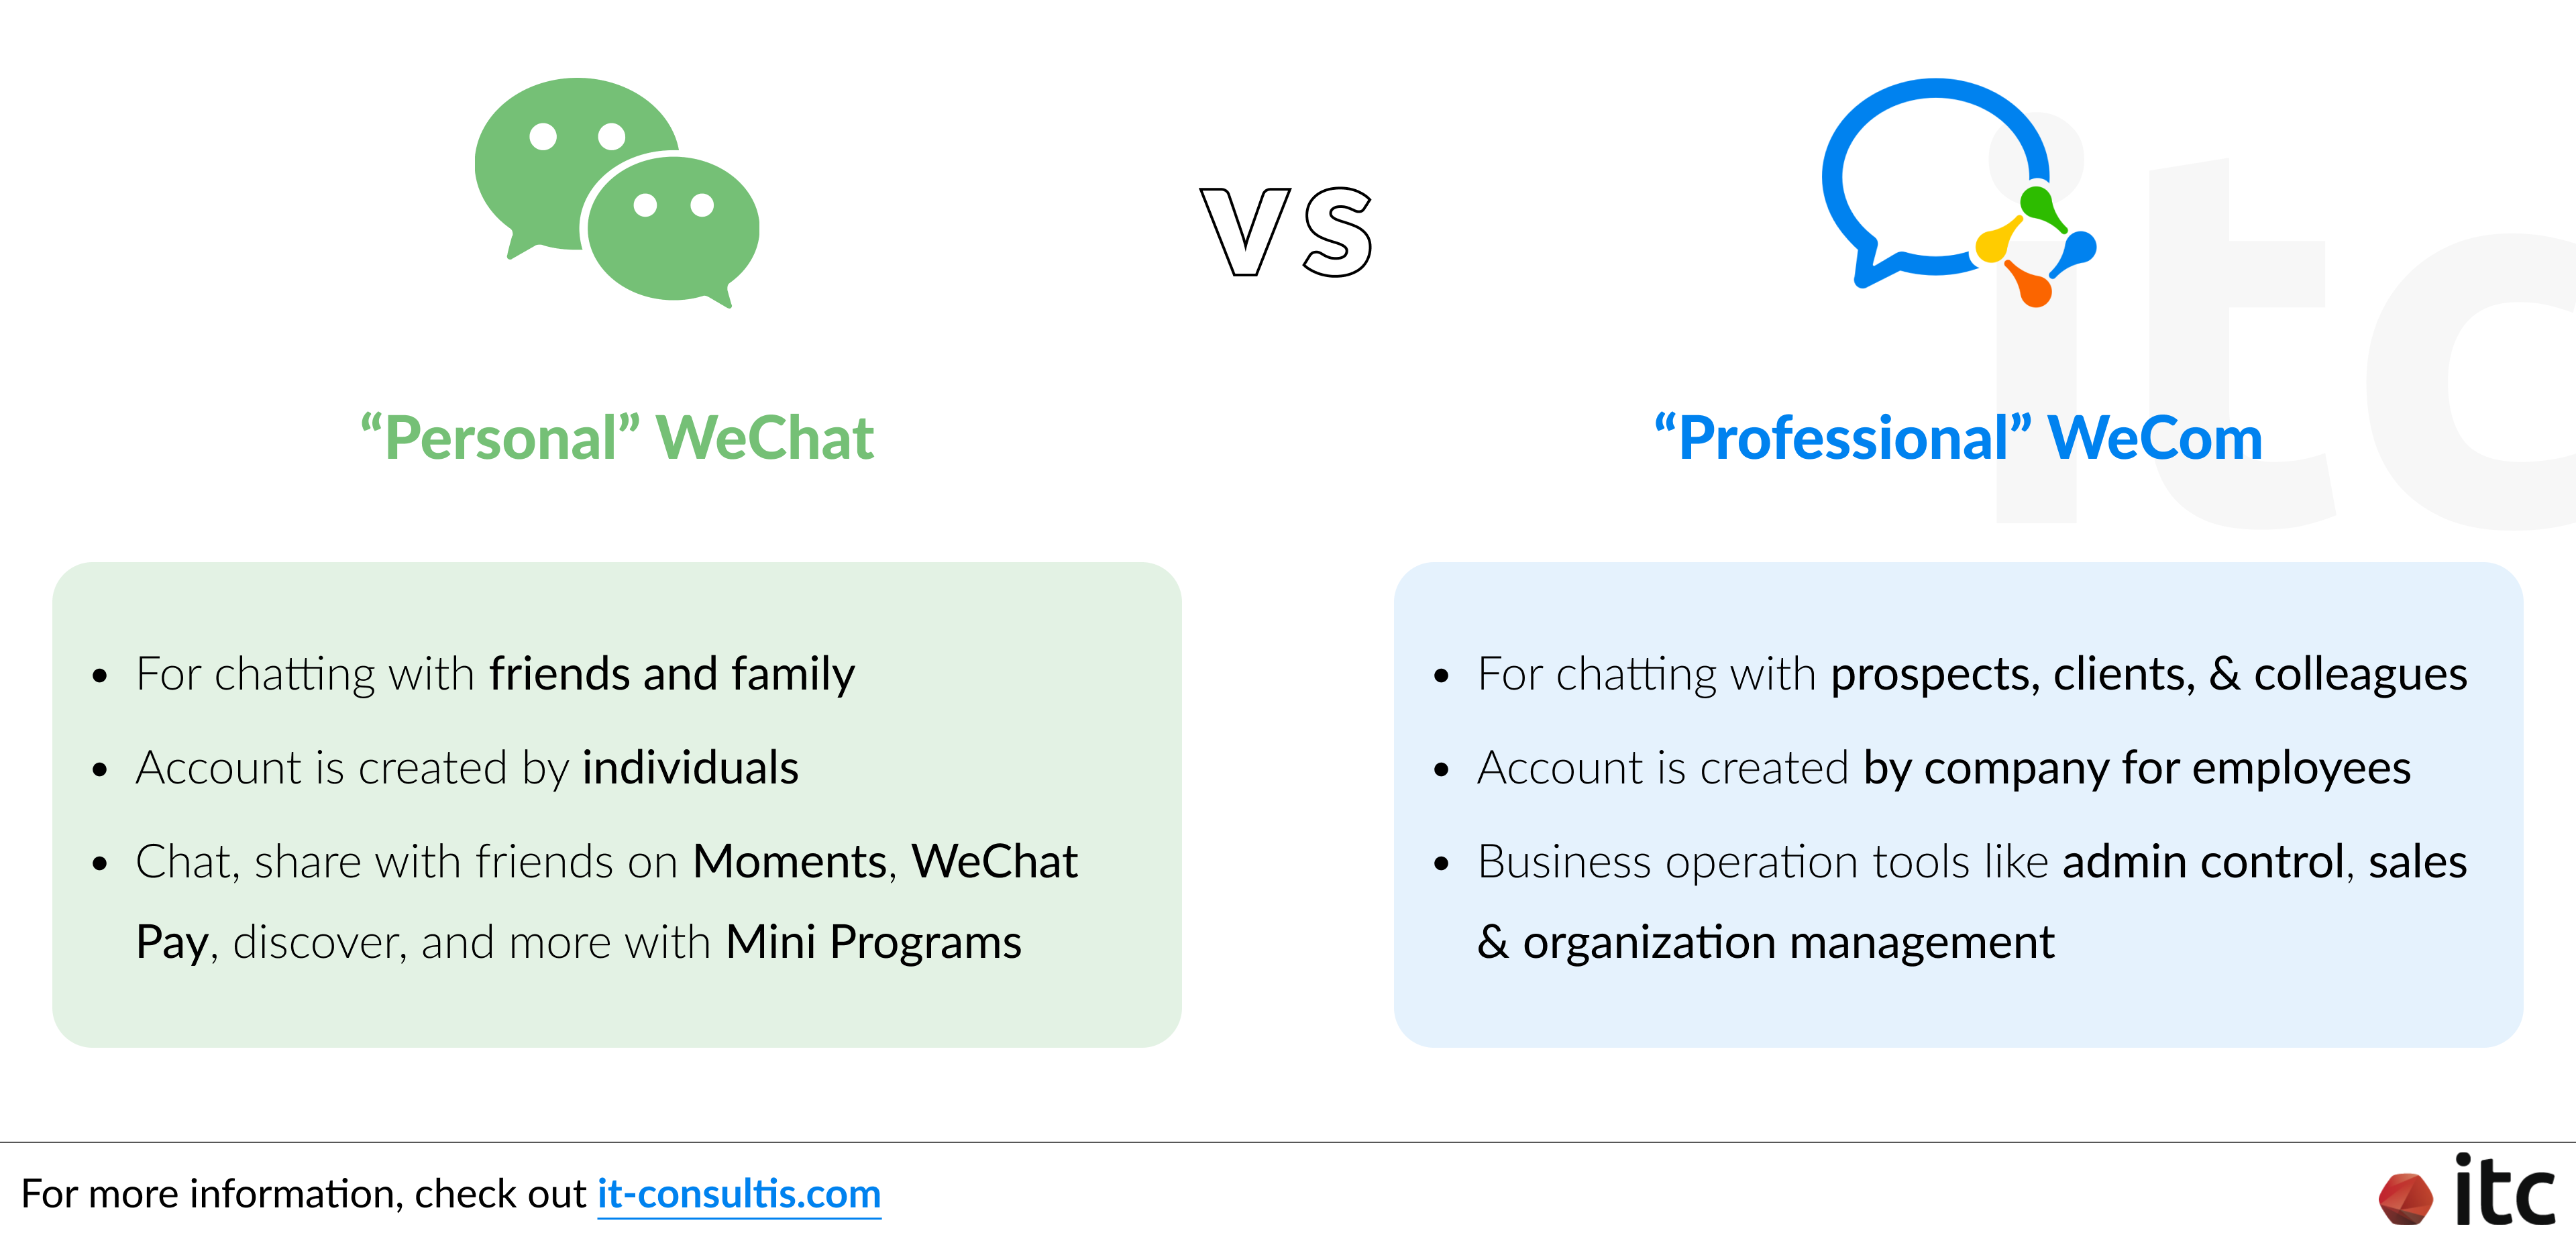 Understanding the differences between "Personal" WeChat and "Professional" WeCom